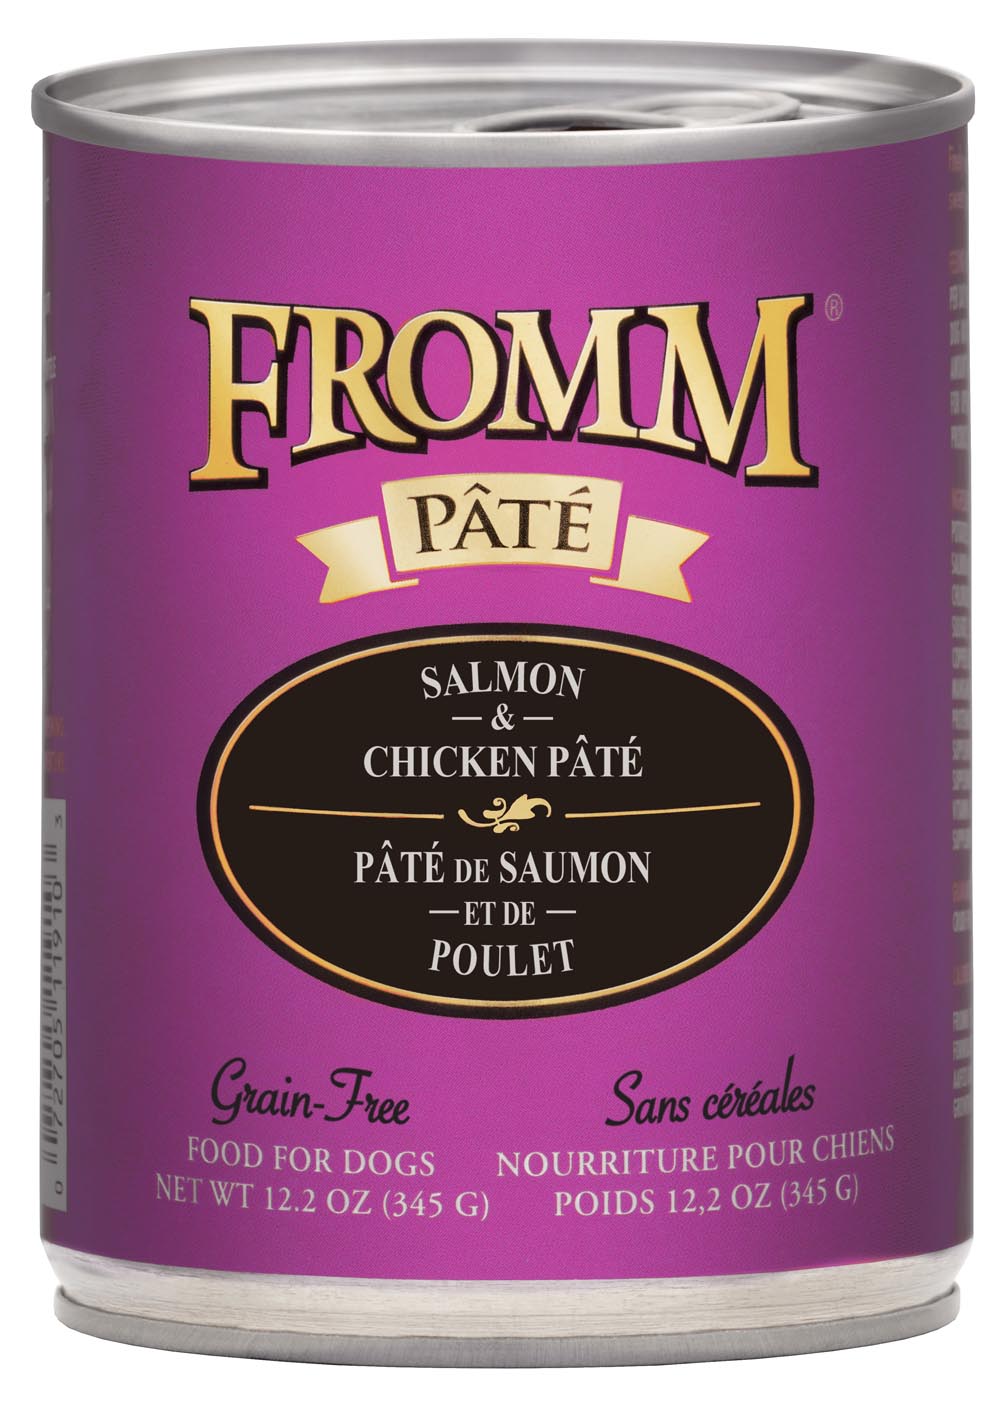 Fromm Salmon & Chicken Pate Food for Dogs, 12.2 OZ